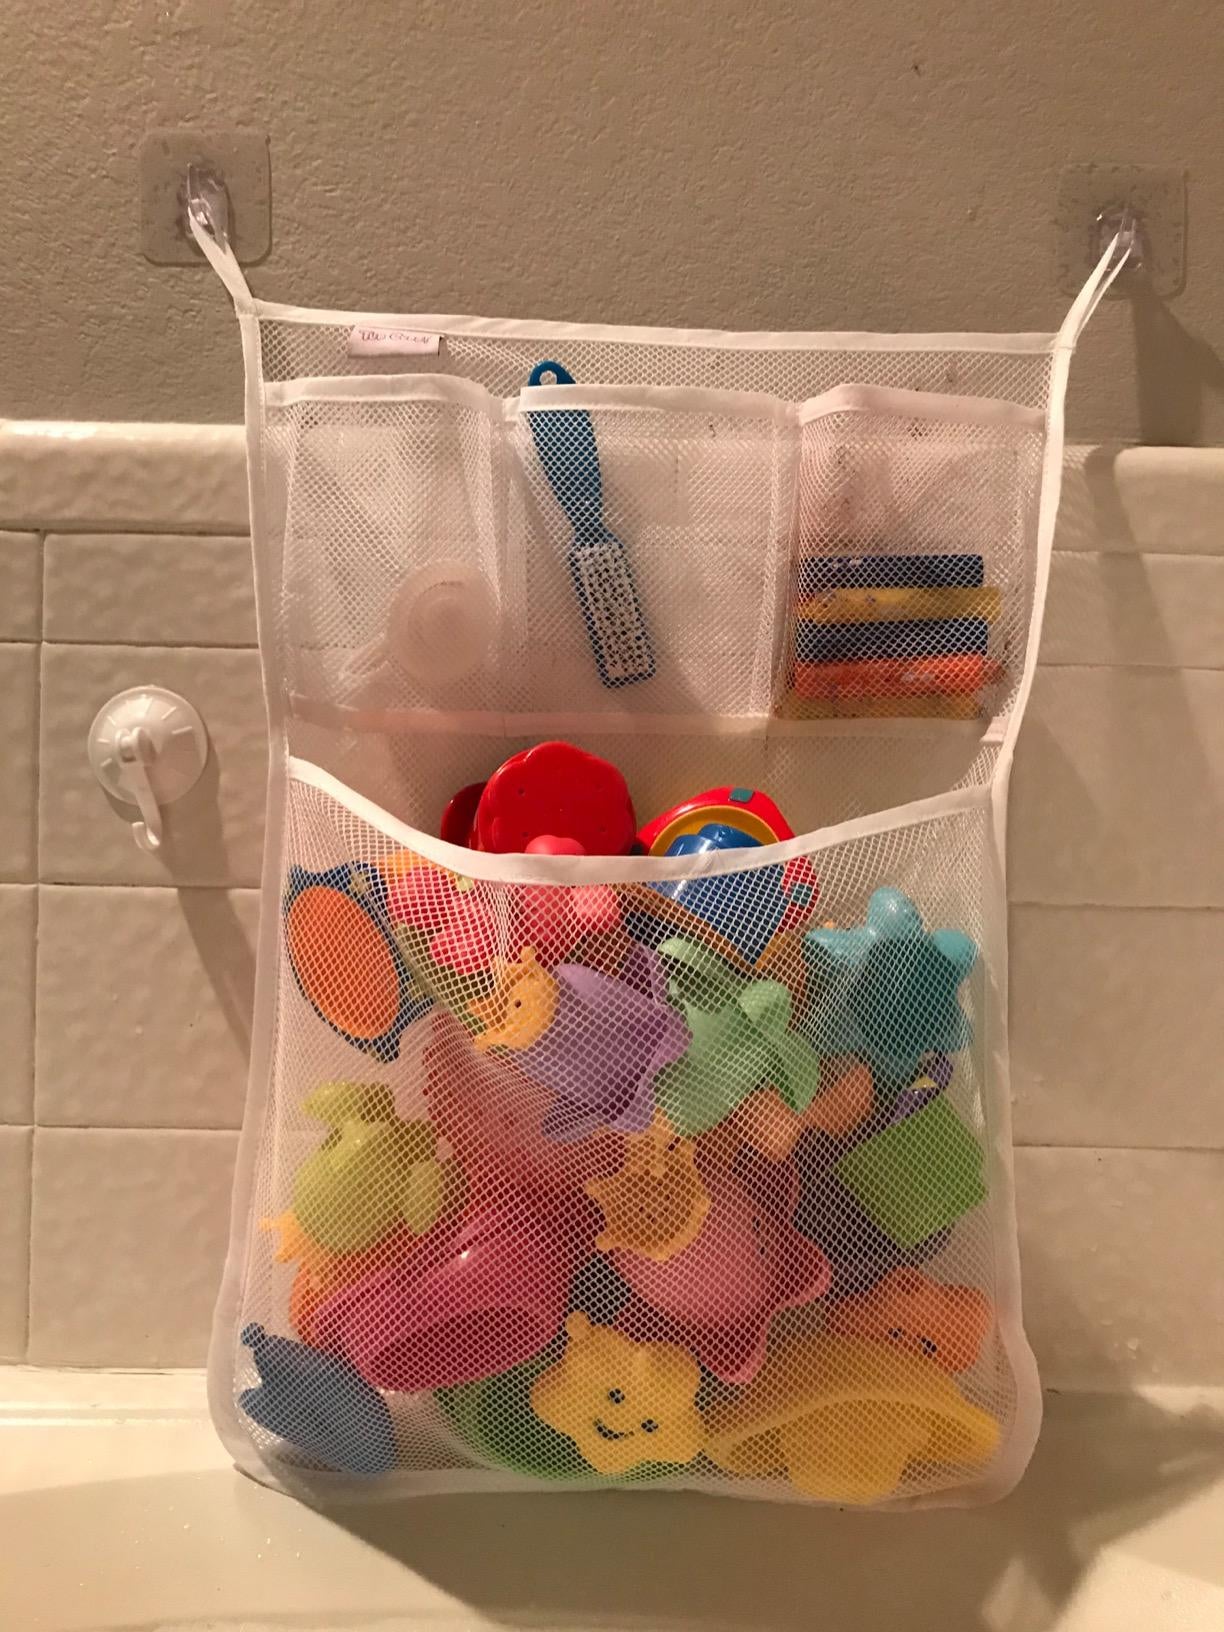 reviewer's mesh organizer containing bath toys and stuck to the wall